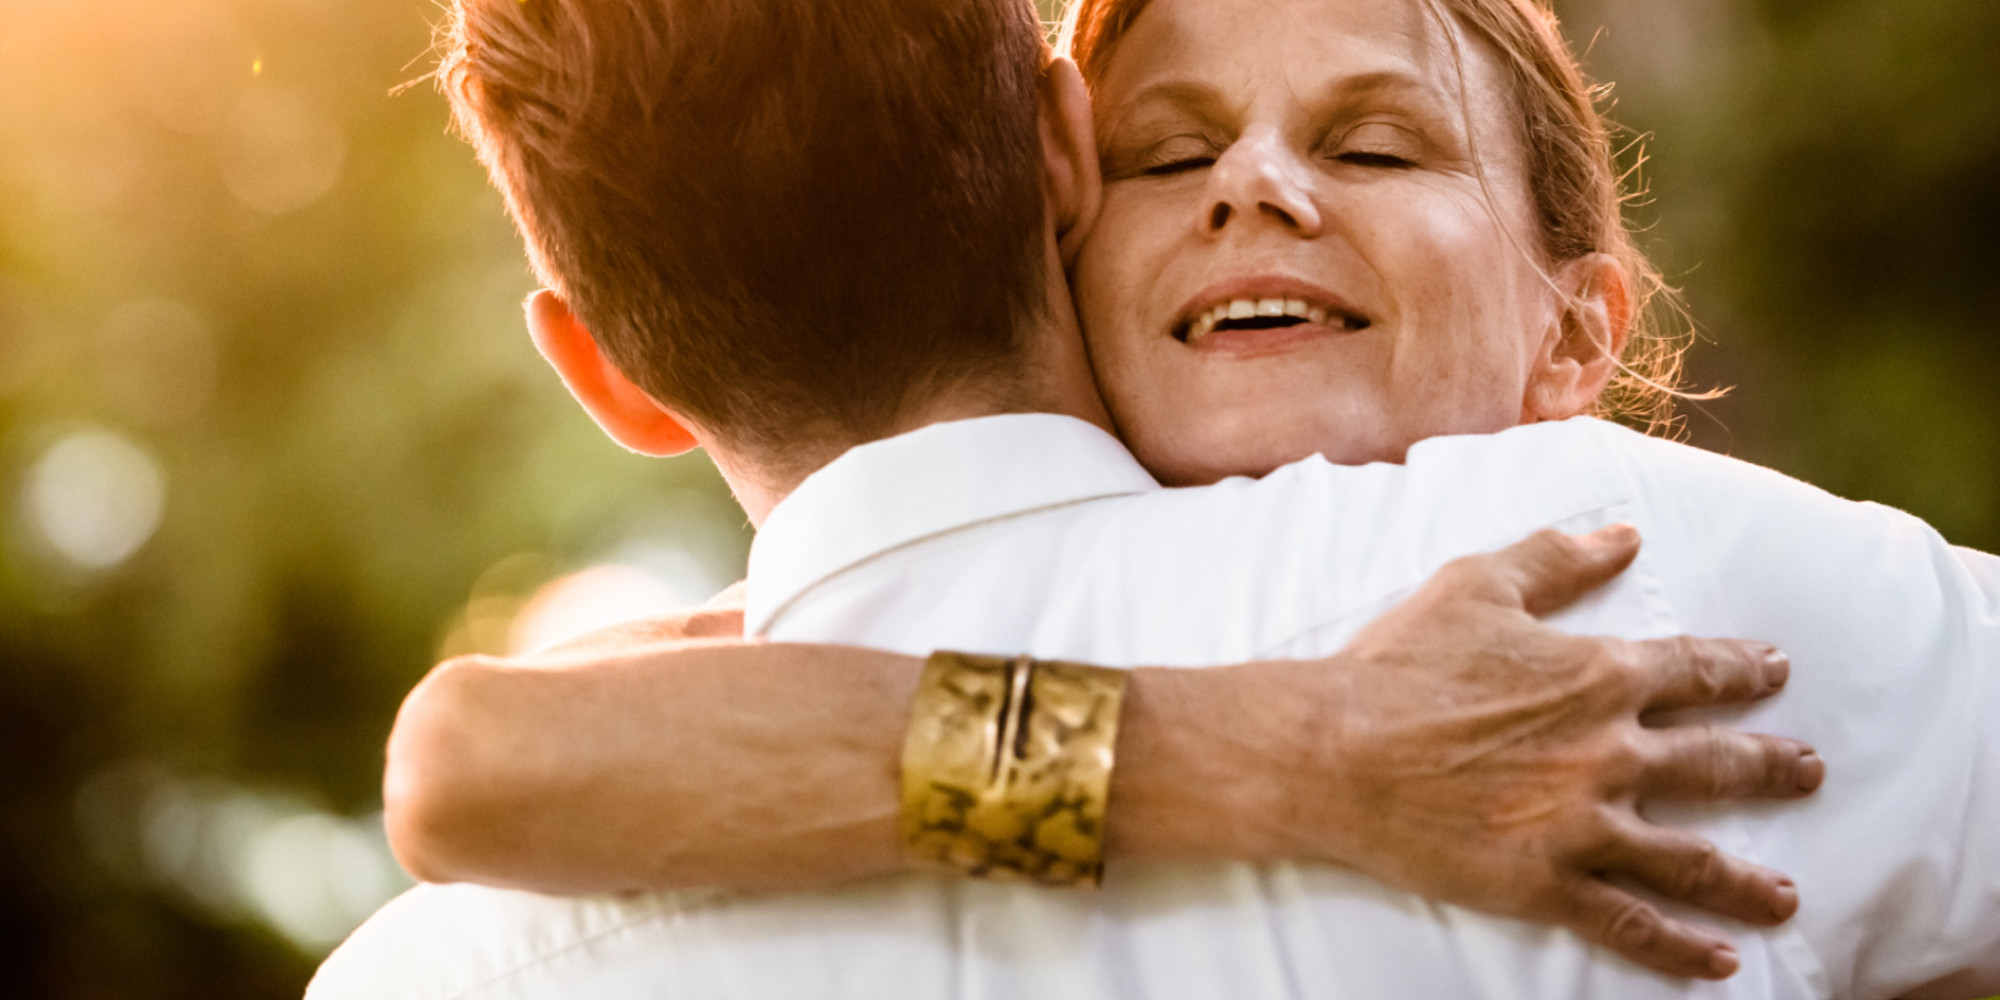 5 Tips for Coping With Early-Onset Alzheimer's Disease | HuffPost